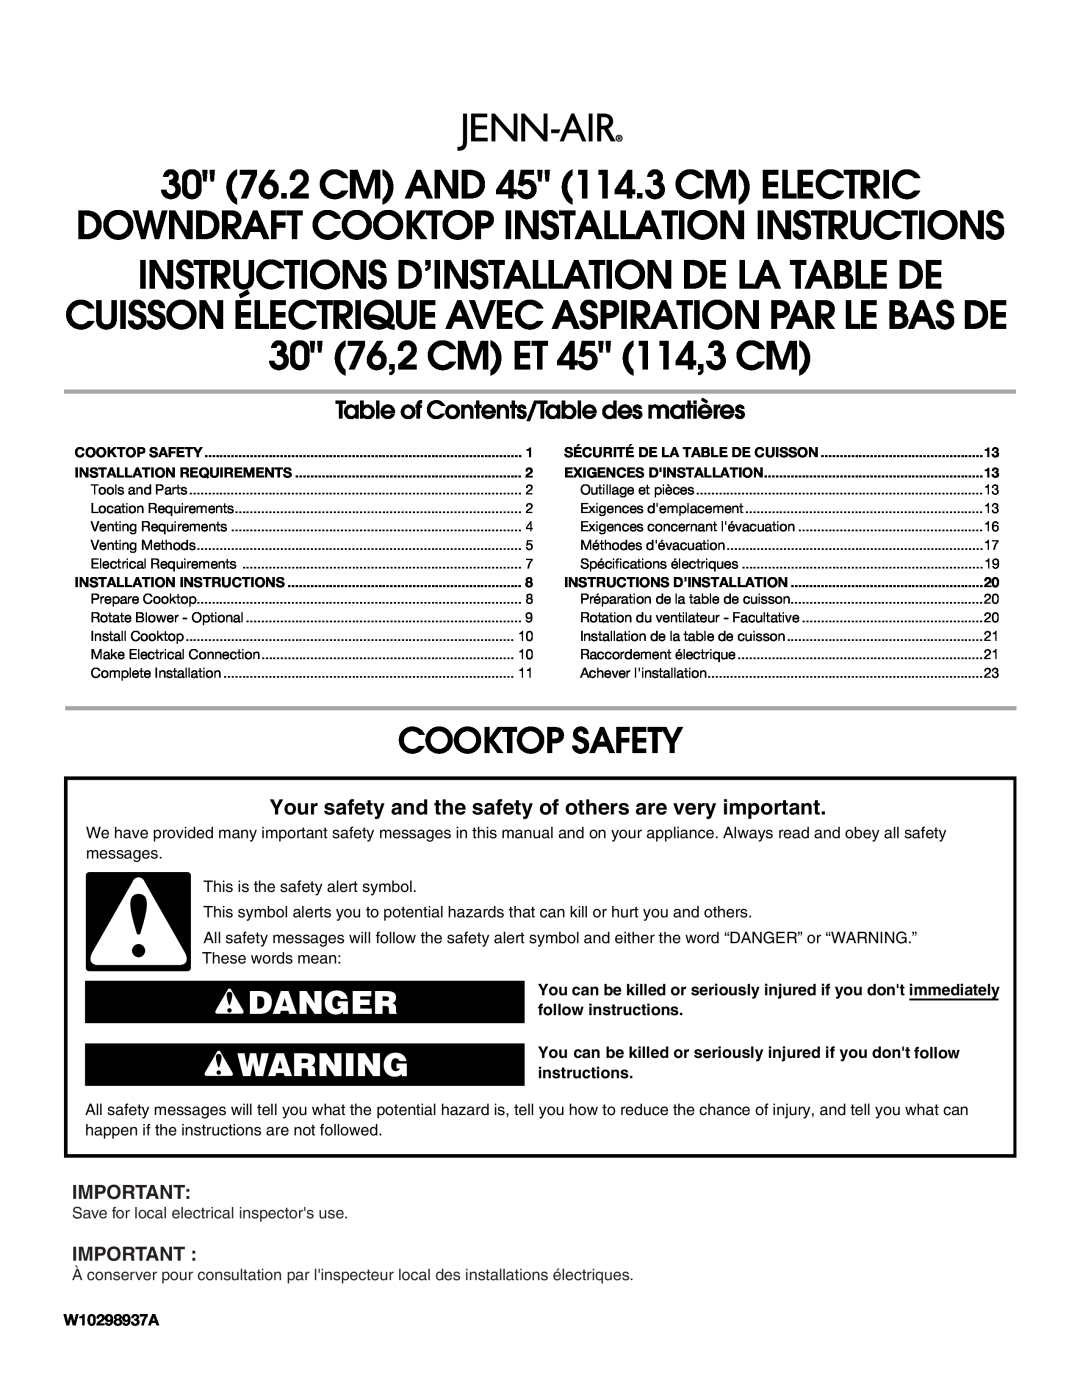 Jenn-Air W10298937A installation instructions Cooktop Safety, Danger, 30 76.2 CM AND 45 114.3 CM ELECTRIC 